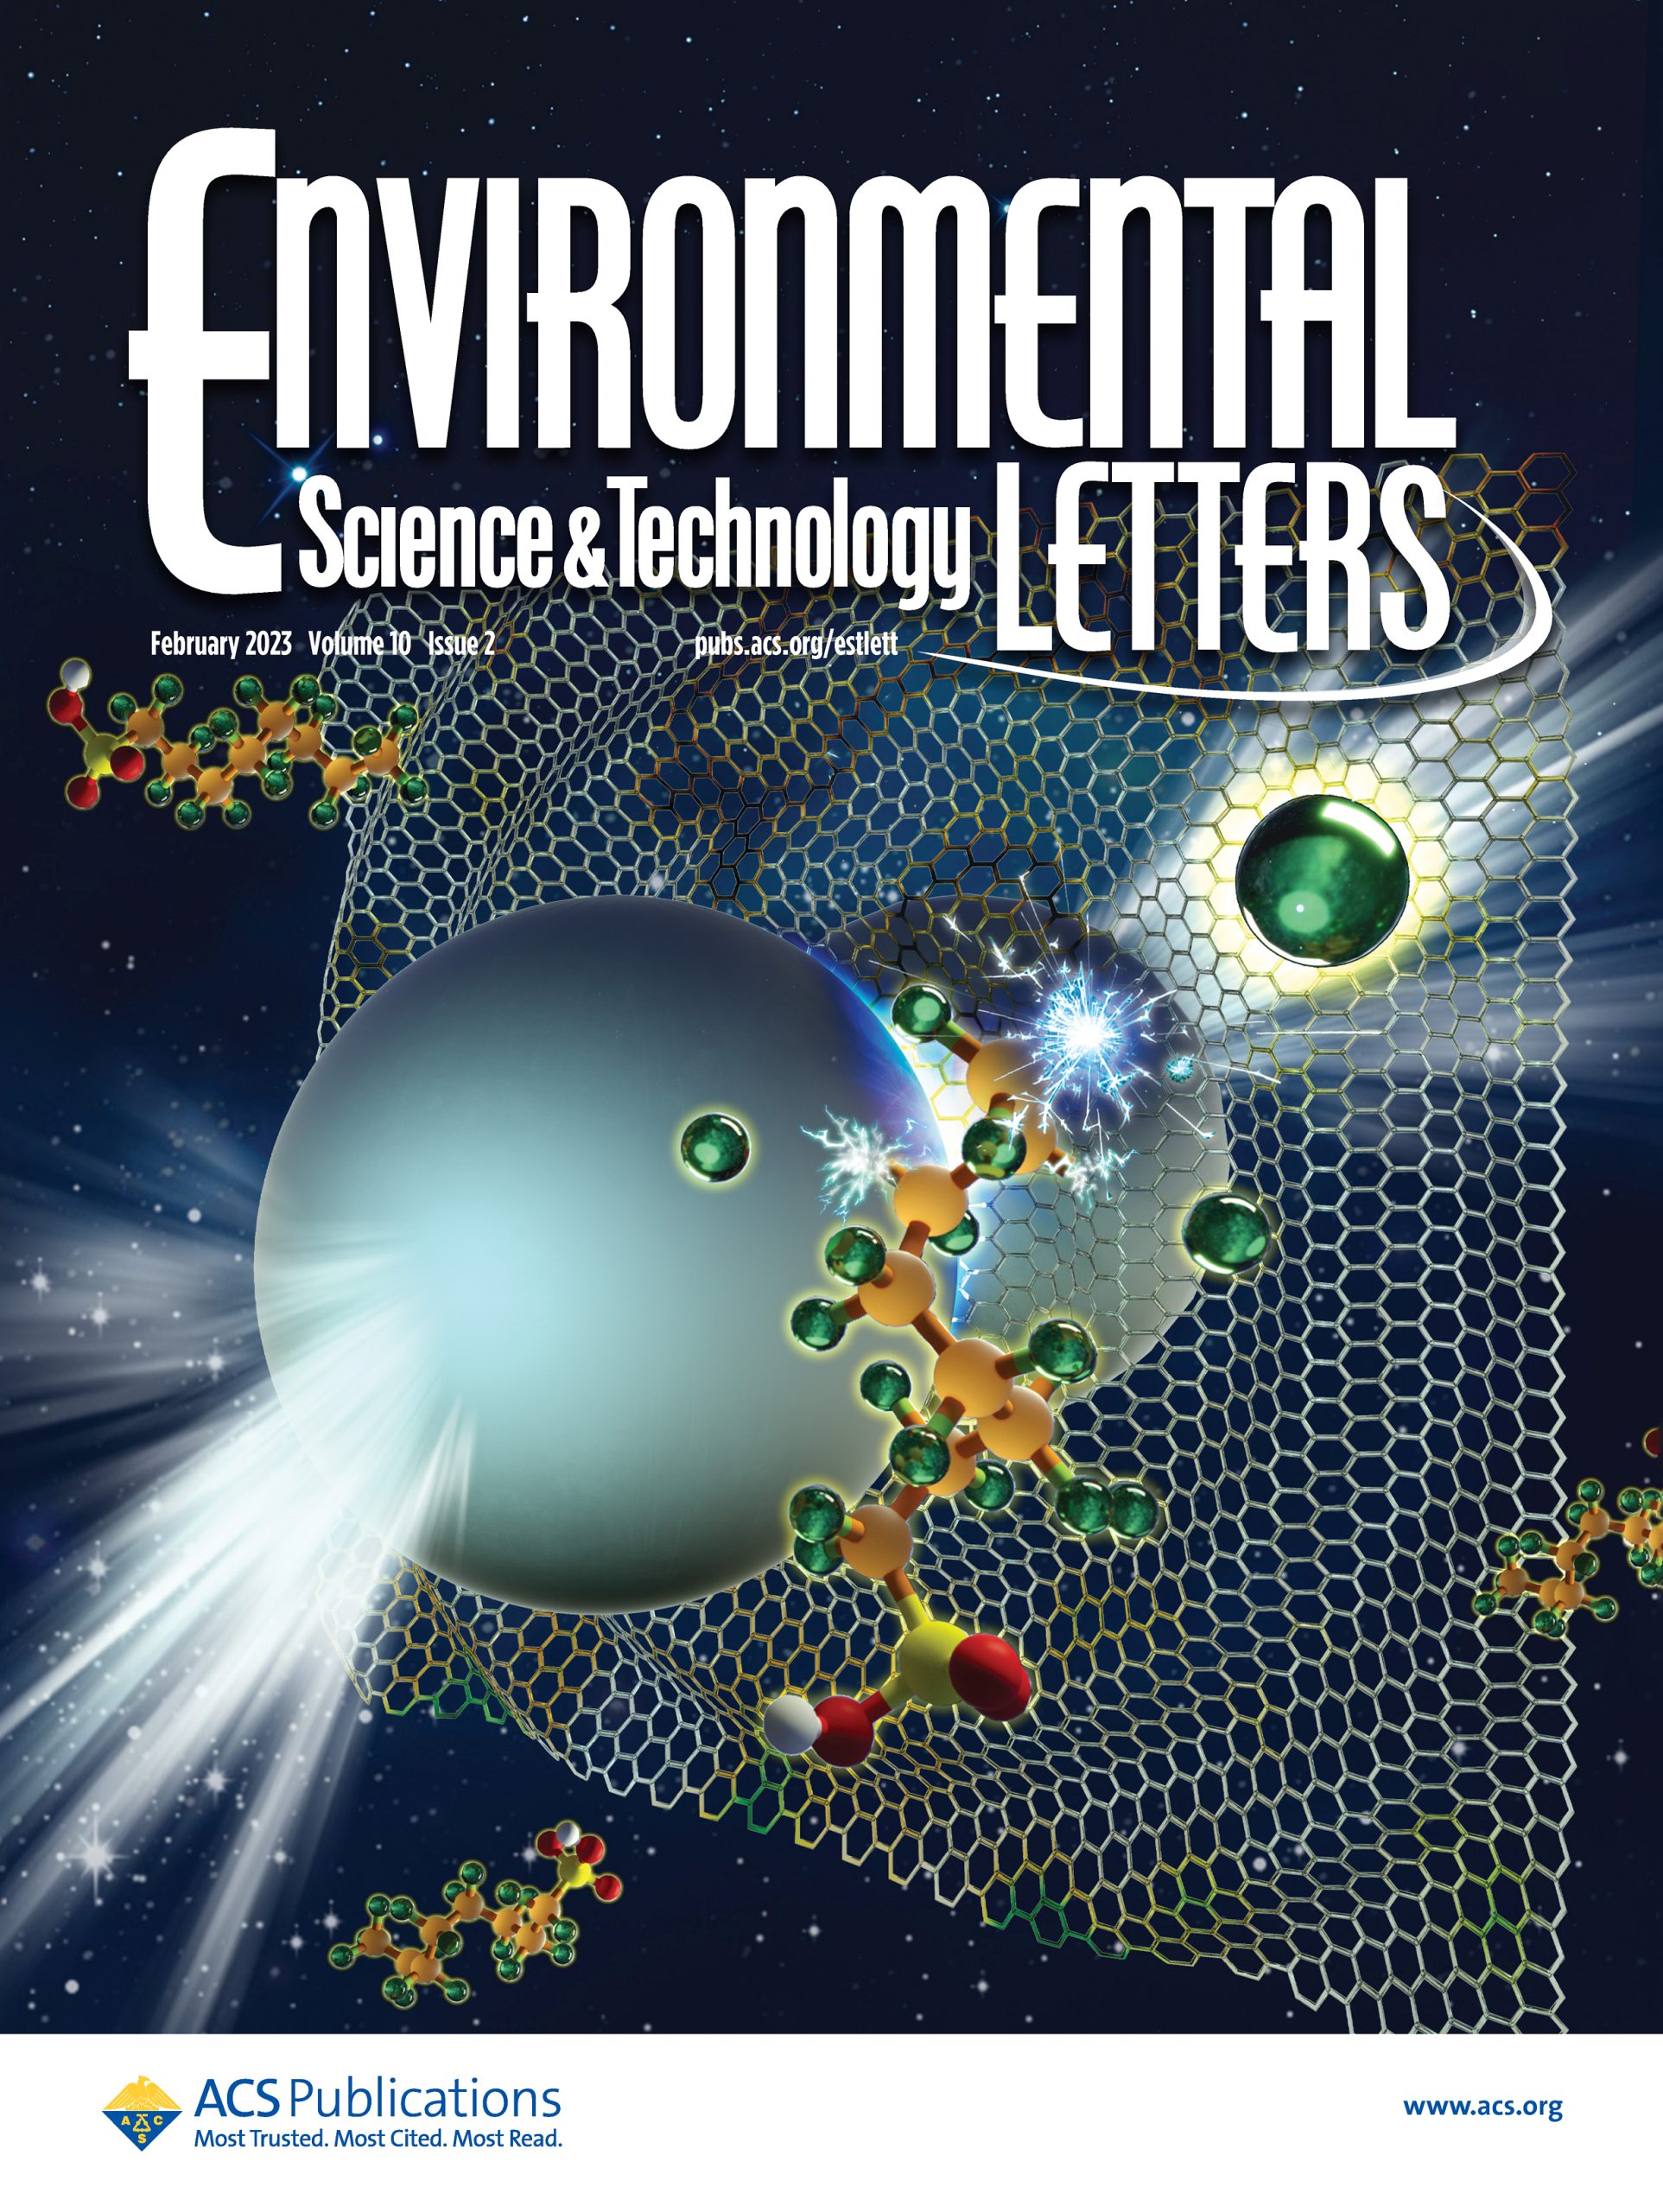 Cover of February 2023 edition of Environmental Science & Technology Letters.